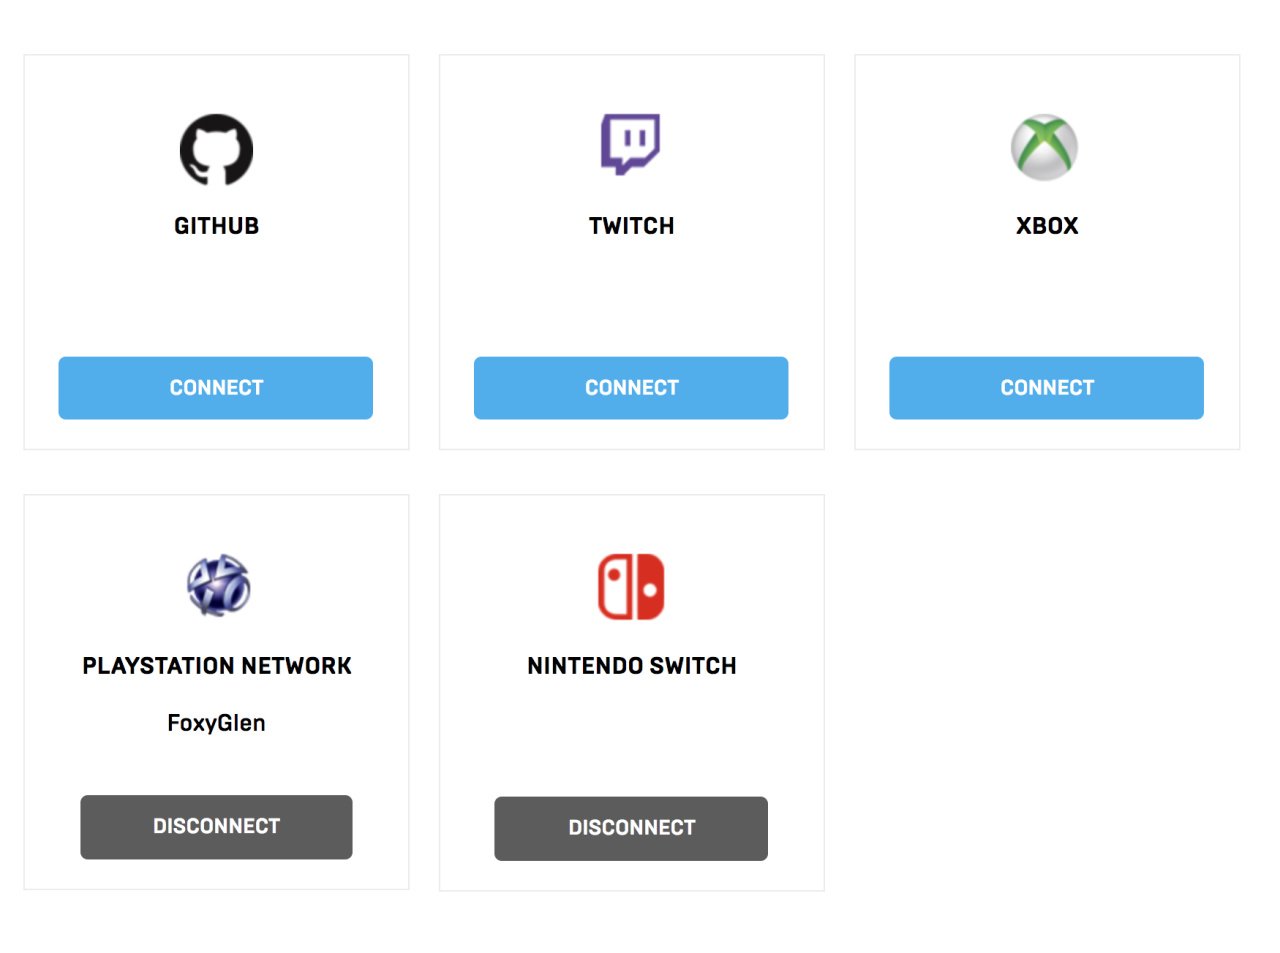 Can you use the same Fortnite account on different consoles?